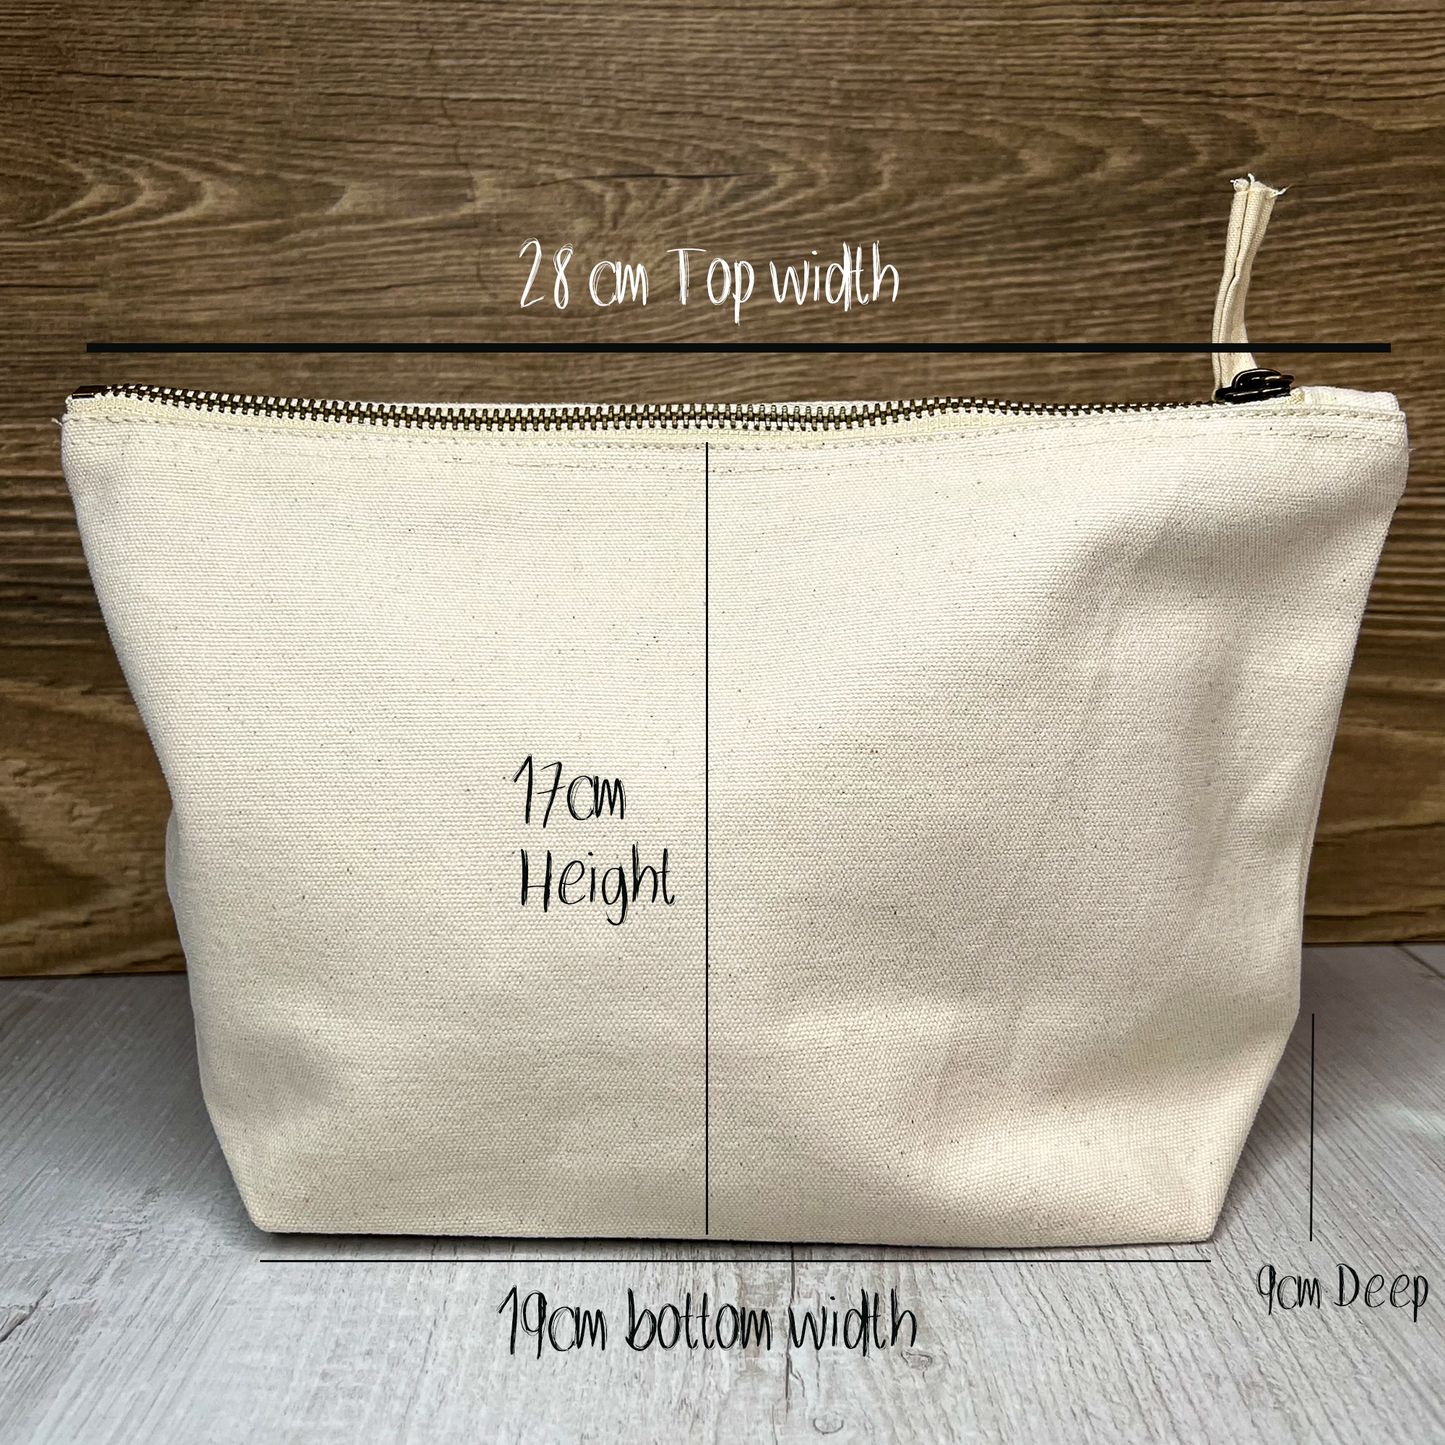 Embroidery Project zip bag